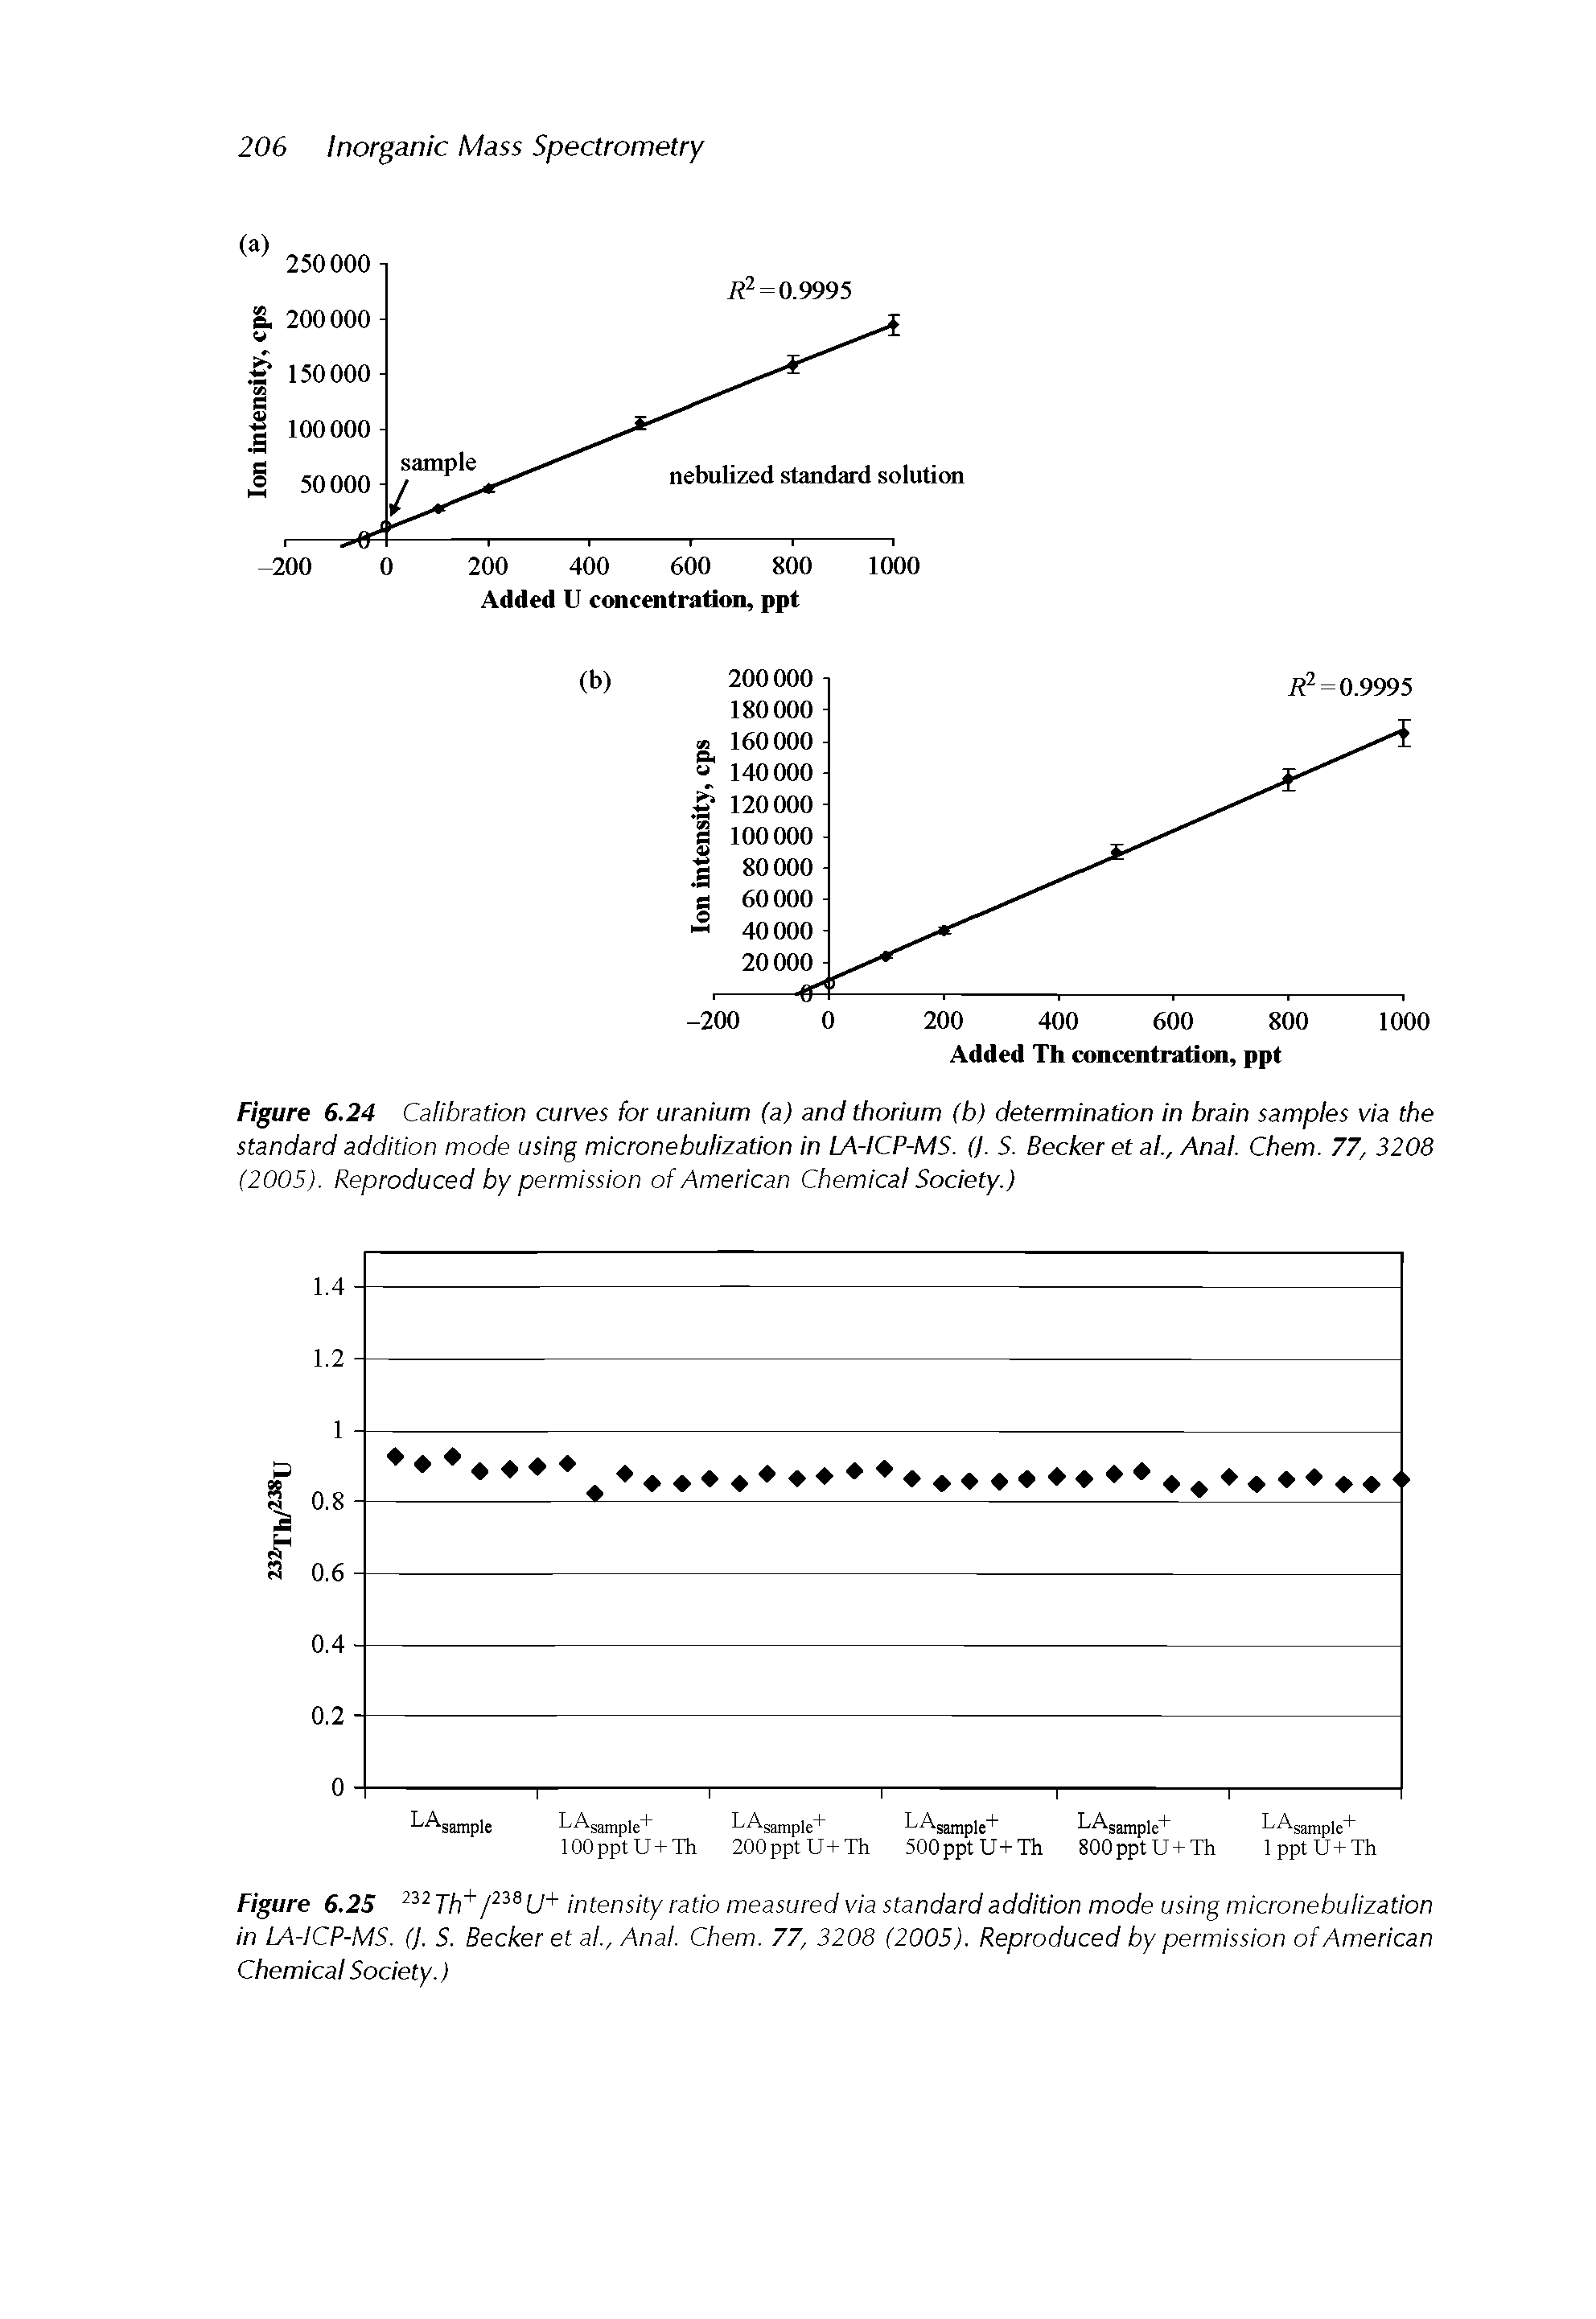 Figure 6.24 Calibration curves for uranium (a) and thorium (b) determination in brain samples via the standard addition mode using micronebulization in LA-ICP-MS. (/. S. Becker et ai, Anal. Chem. 77, 3208 (2005). Reproduced by permission of American Chemical Society.)...